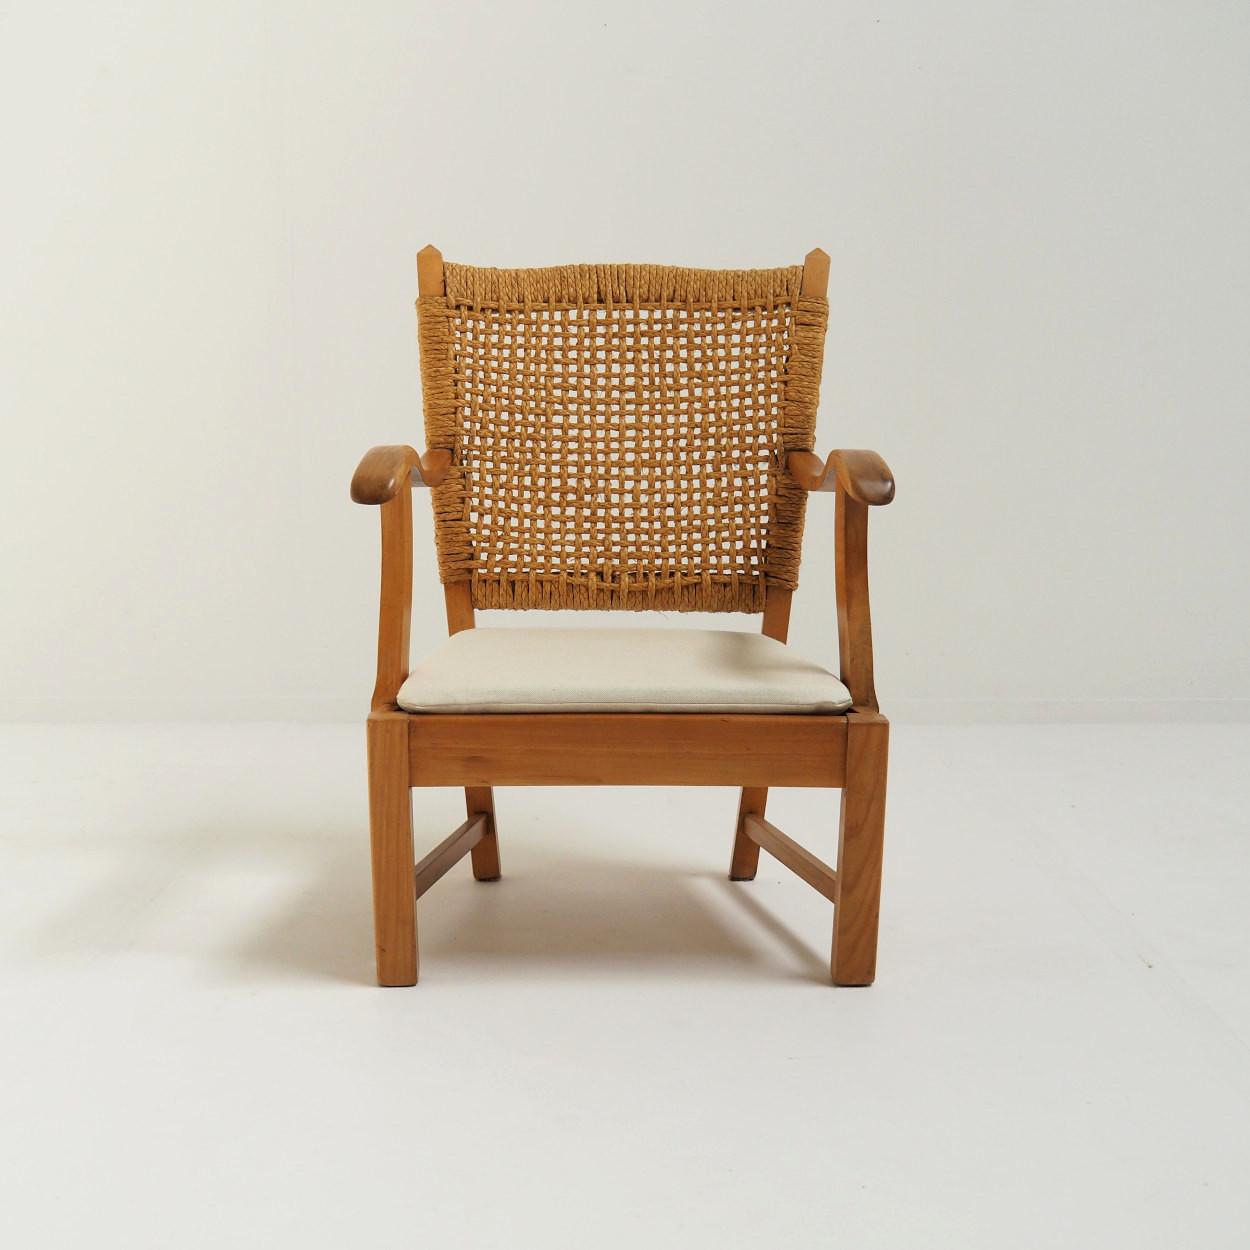 Mid-20th Century 1930s Modernist Rope Chair attr. to Bas Van Pelt, The Netherlands